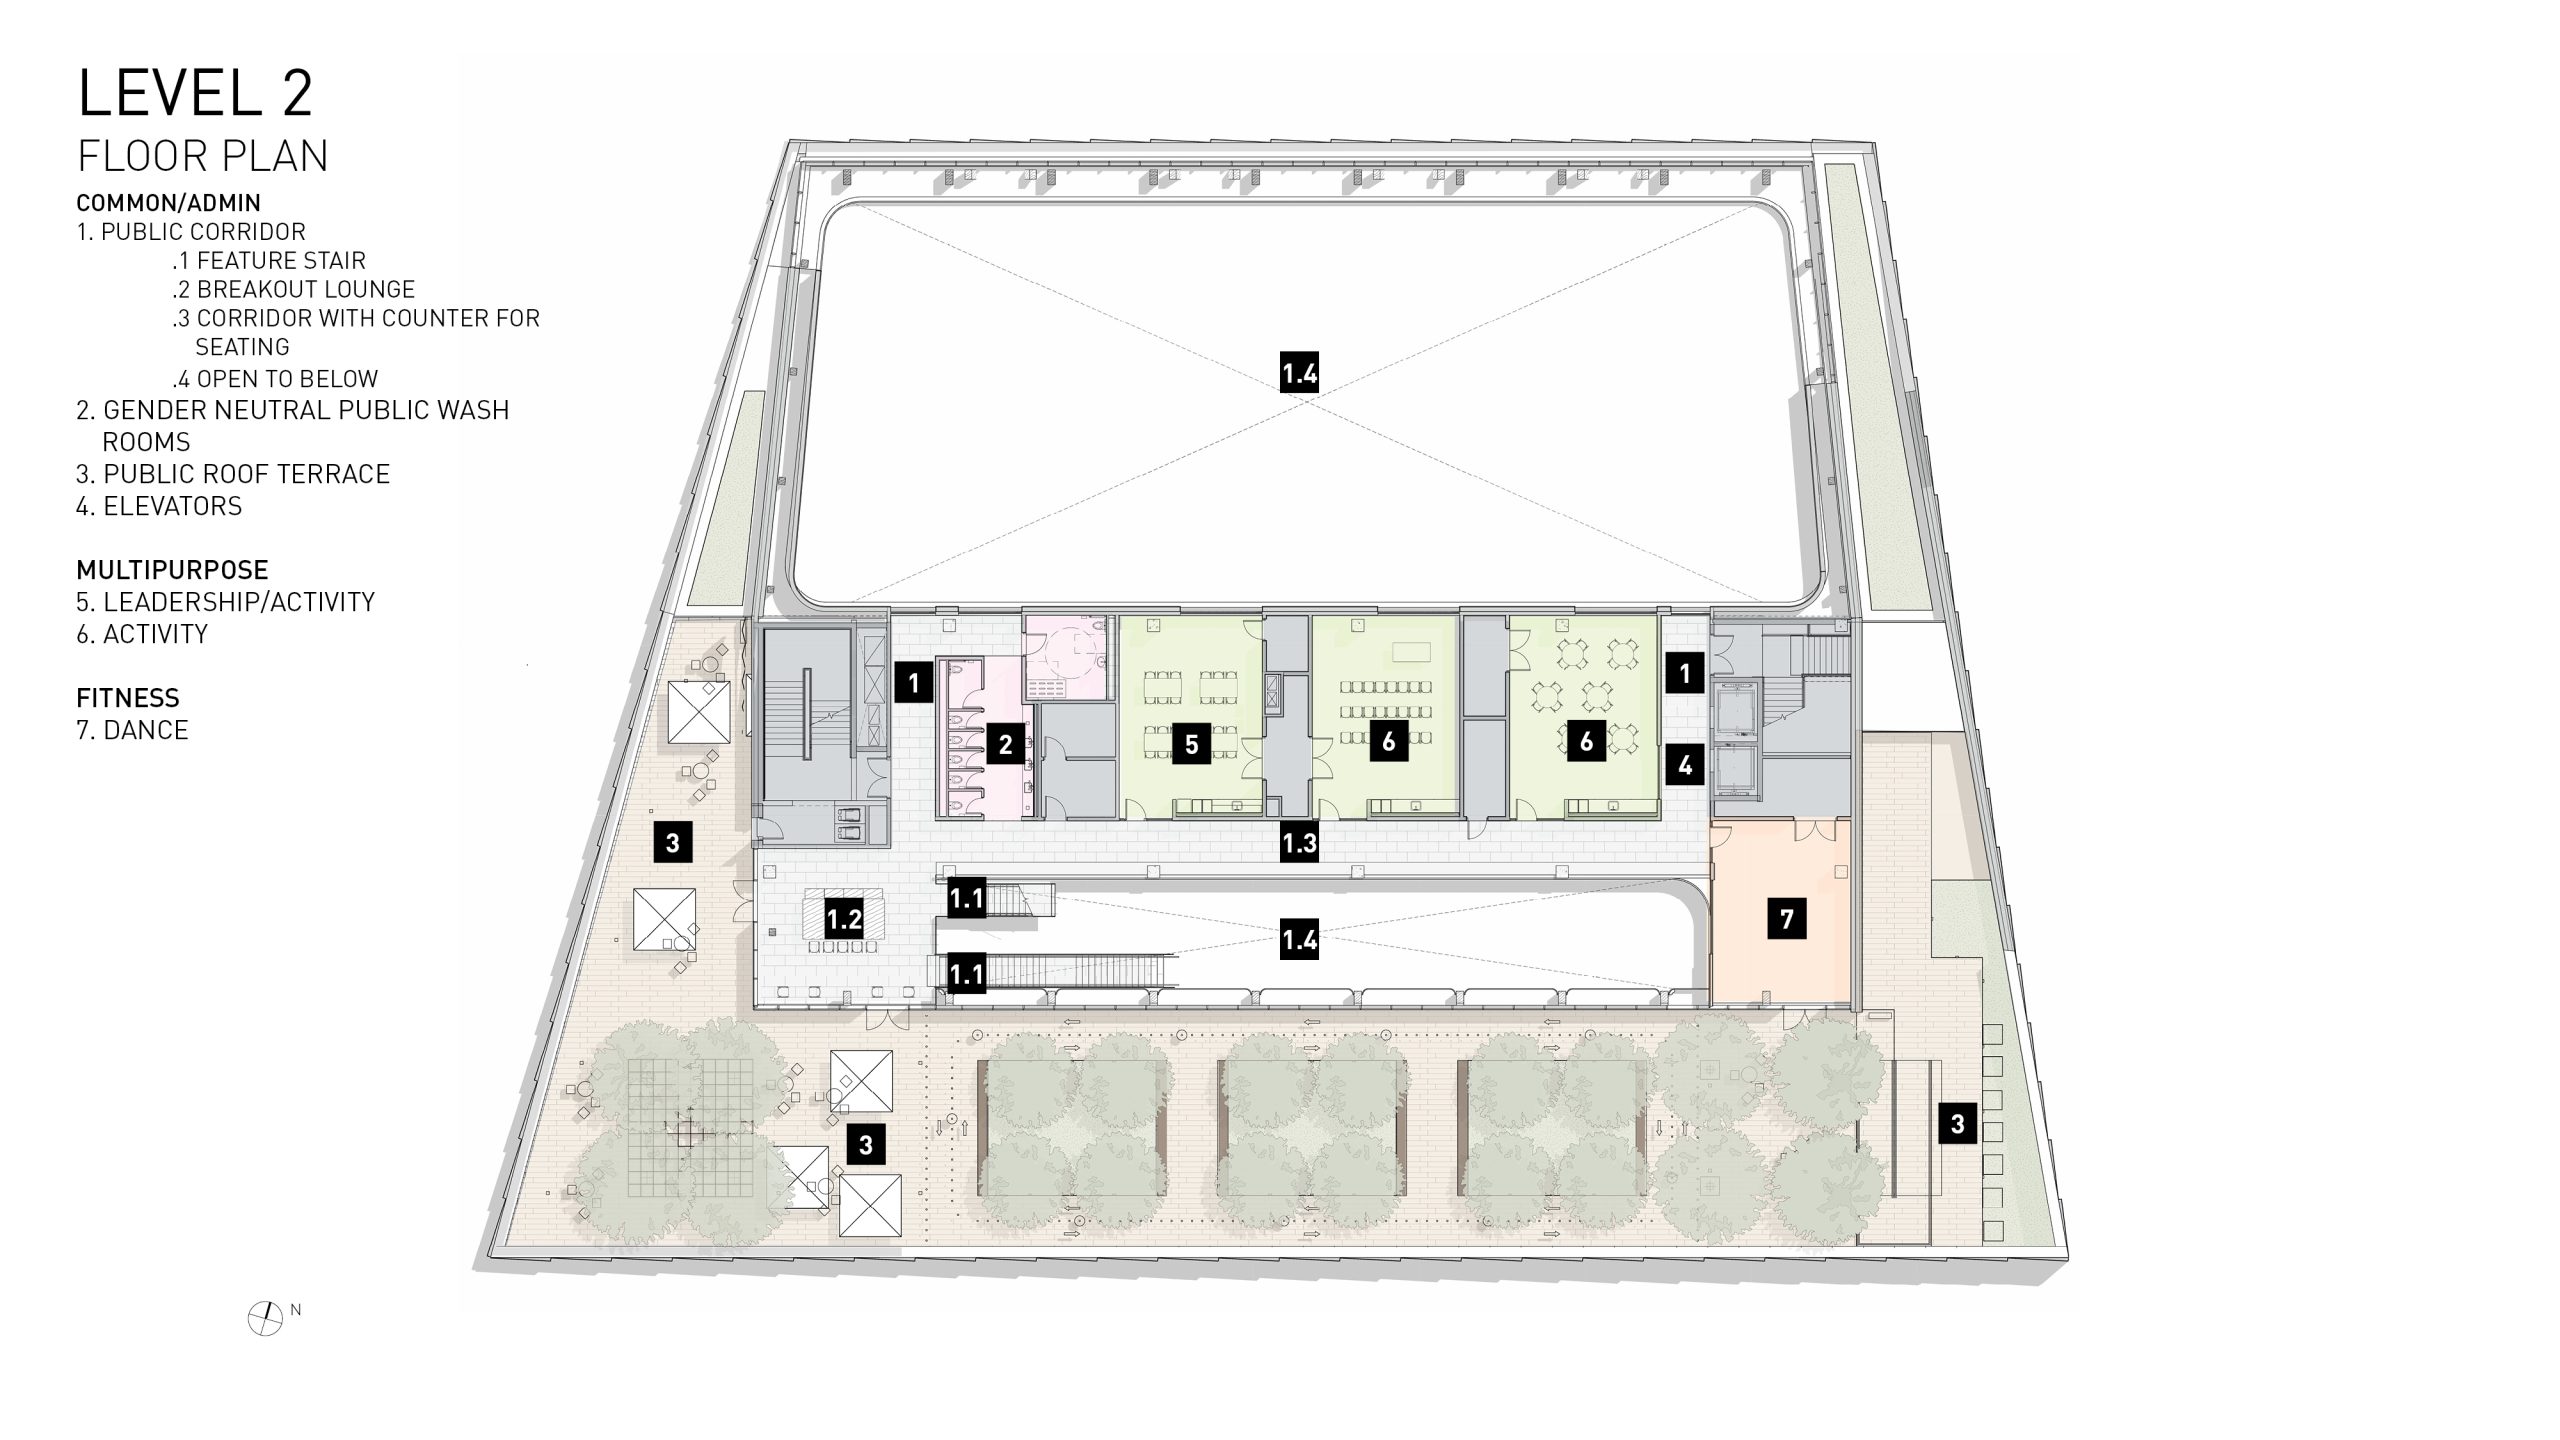 Plan detailing the second floor. A series of activity rooms with views into the Aquatic Hall below line the north side floor and are accessed by corridor to the south, which is open to the lobby below and provides a long counter for casual seating. The atrium has a breakout lounge on either side to the west and dance room on the east which both provide access to a public outdoor terrace to the south and west. Elevators are at the east side adjacent the dance room or by a feature stair at the west end of the lobby. Public washrooms are located on the west end of the block of activity rooms, close to the breakout lounge area.